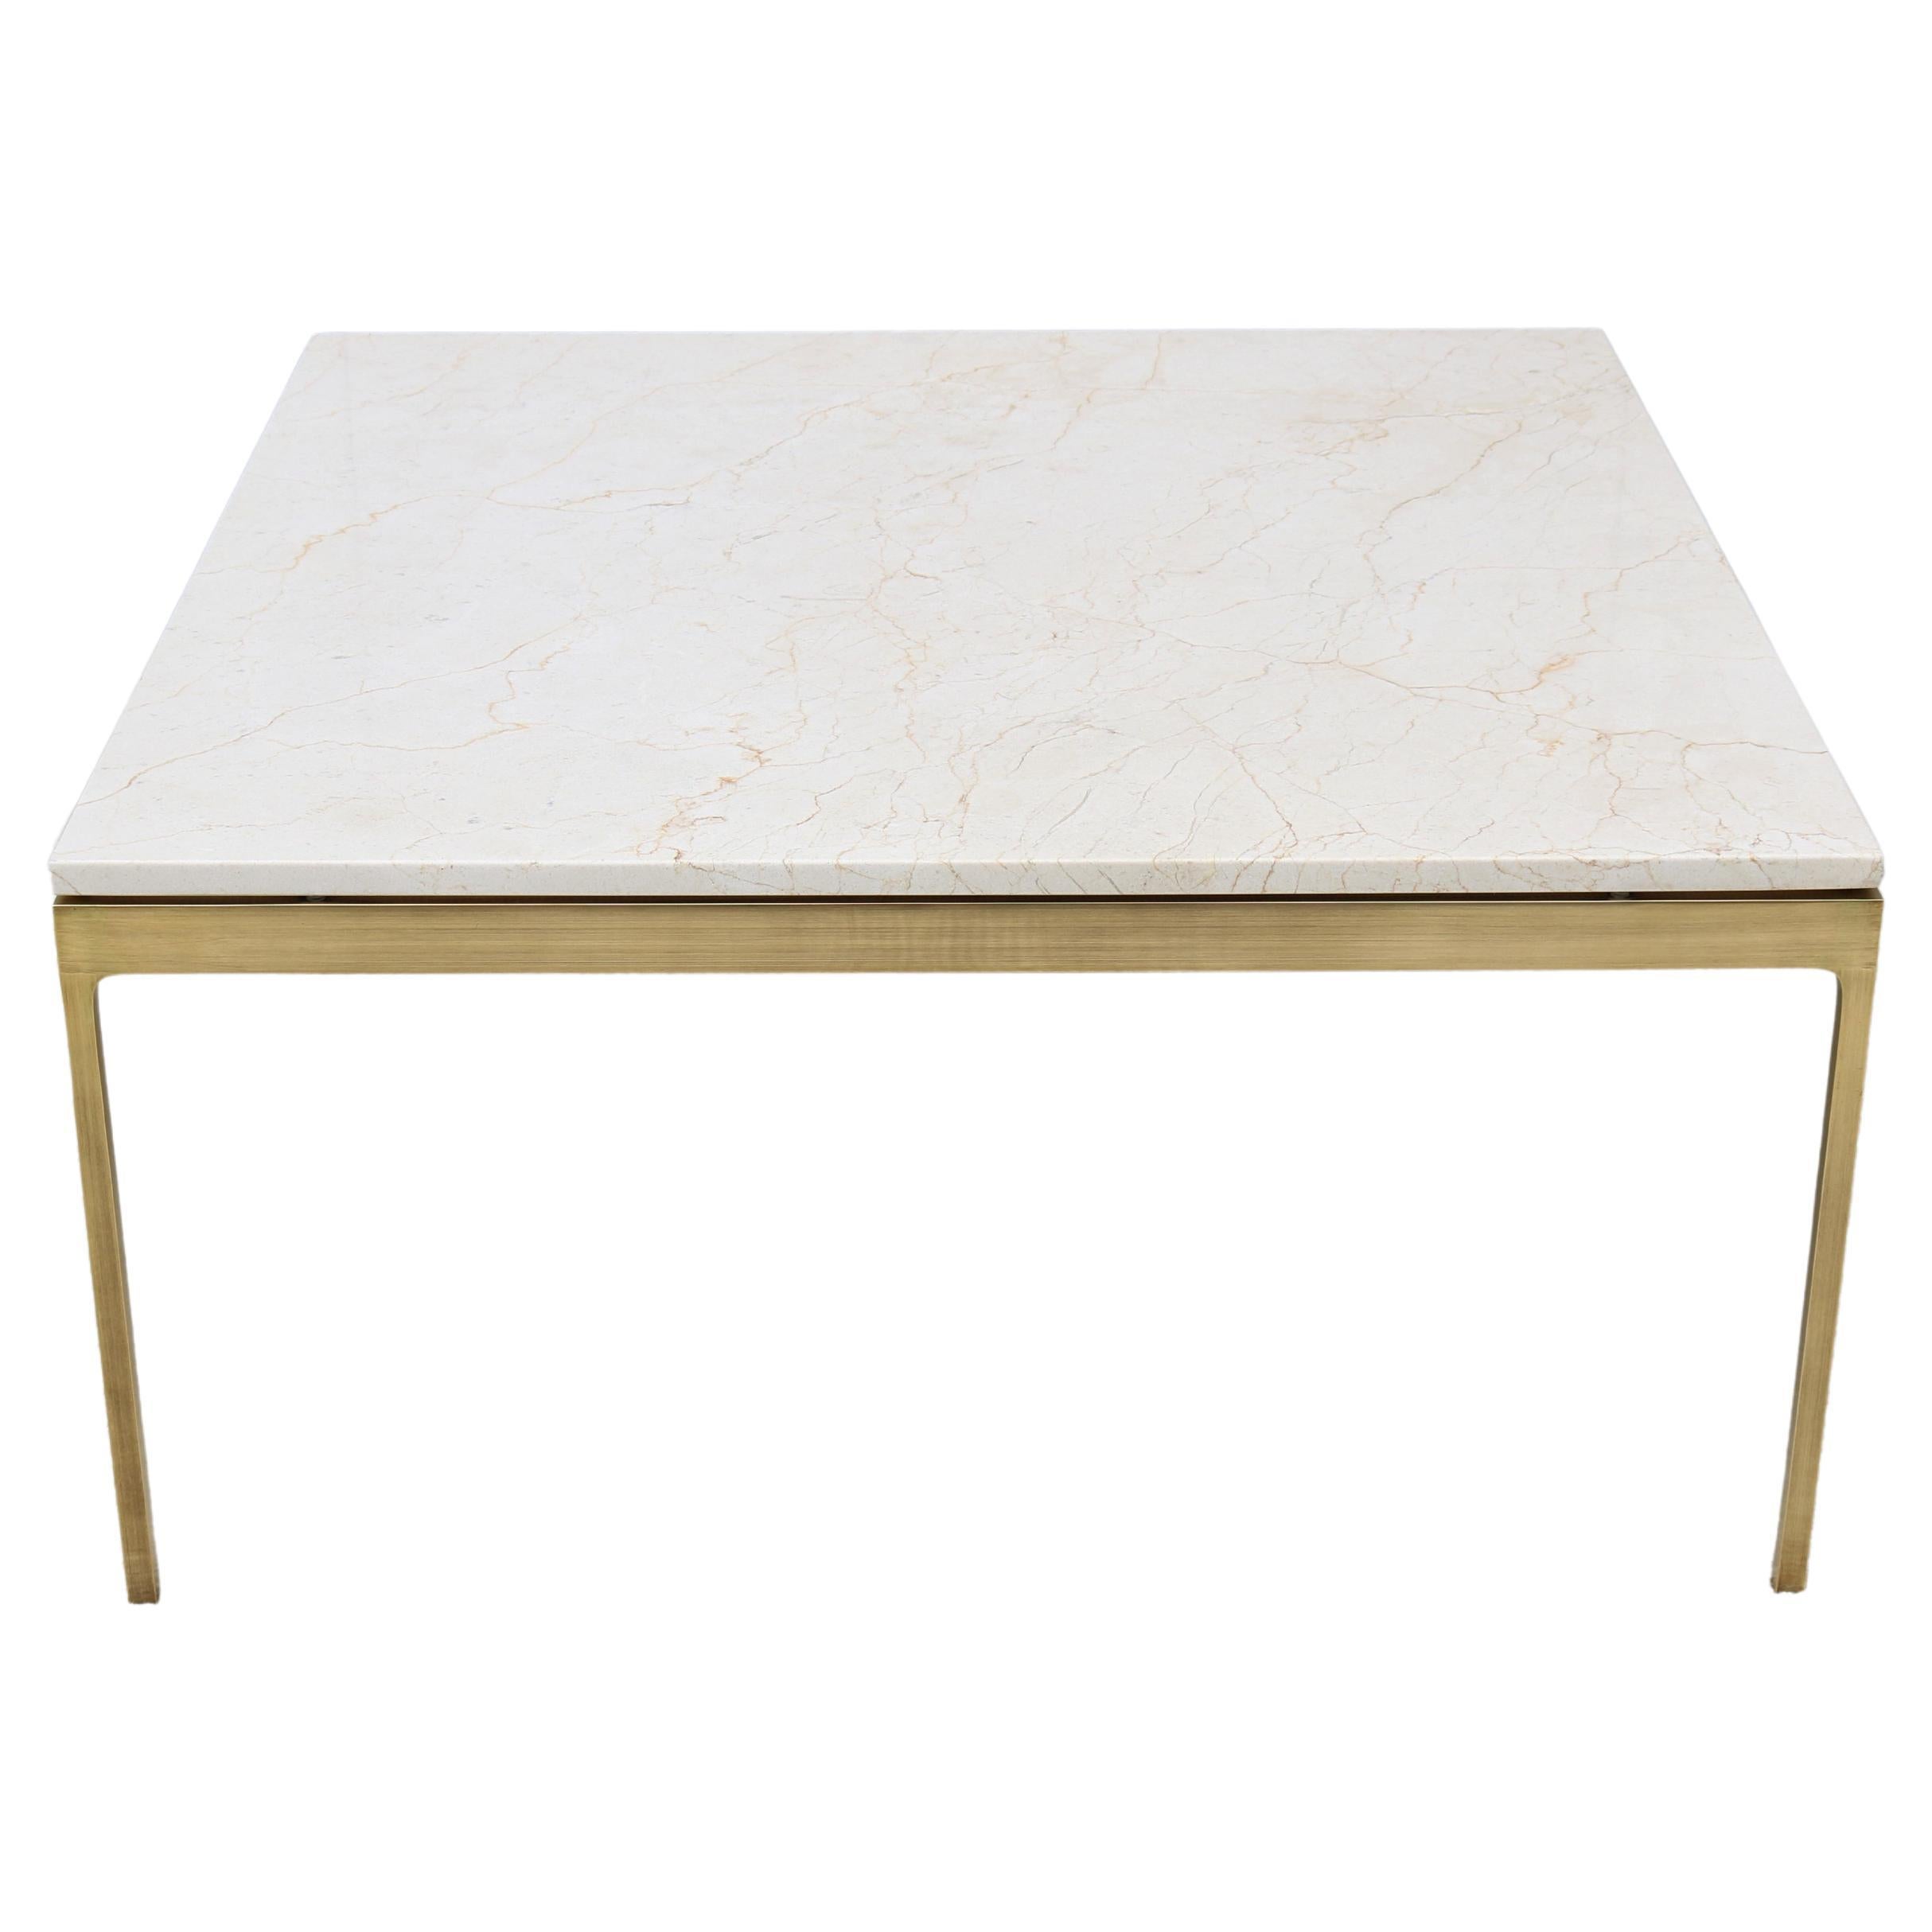 Vintage Mid-Century Modern Nicos Zographos Marble and Brass Square Coffee Table For Sale